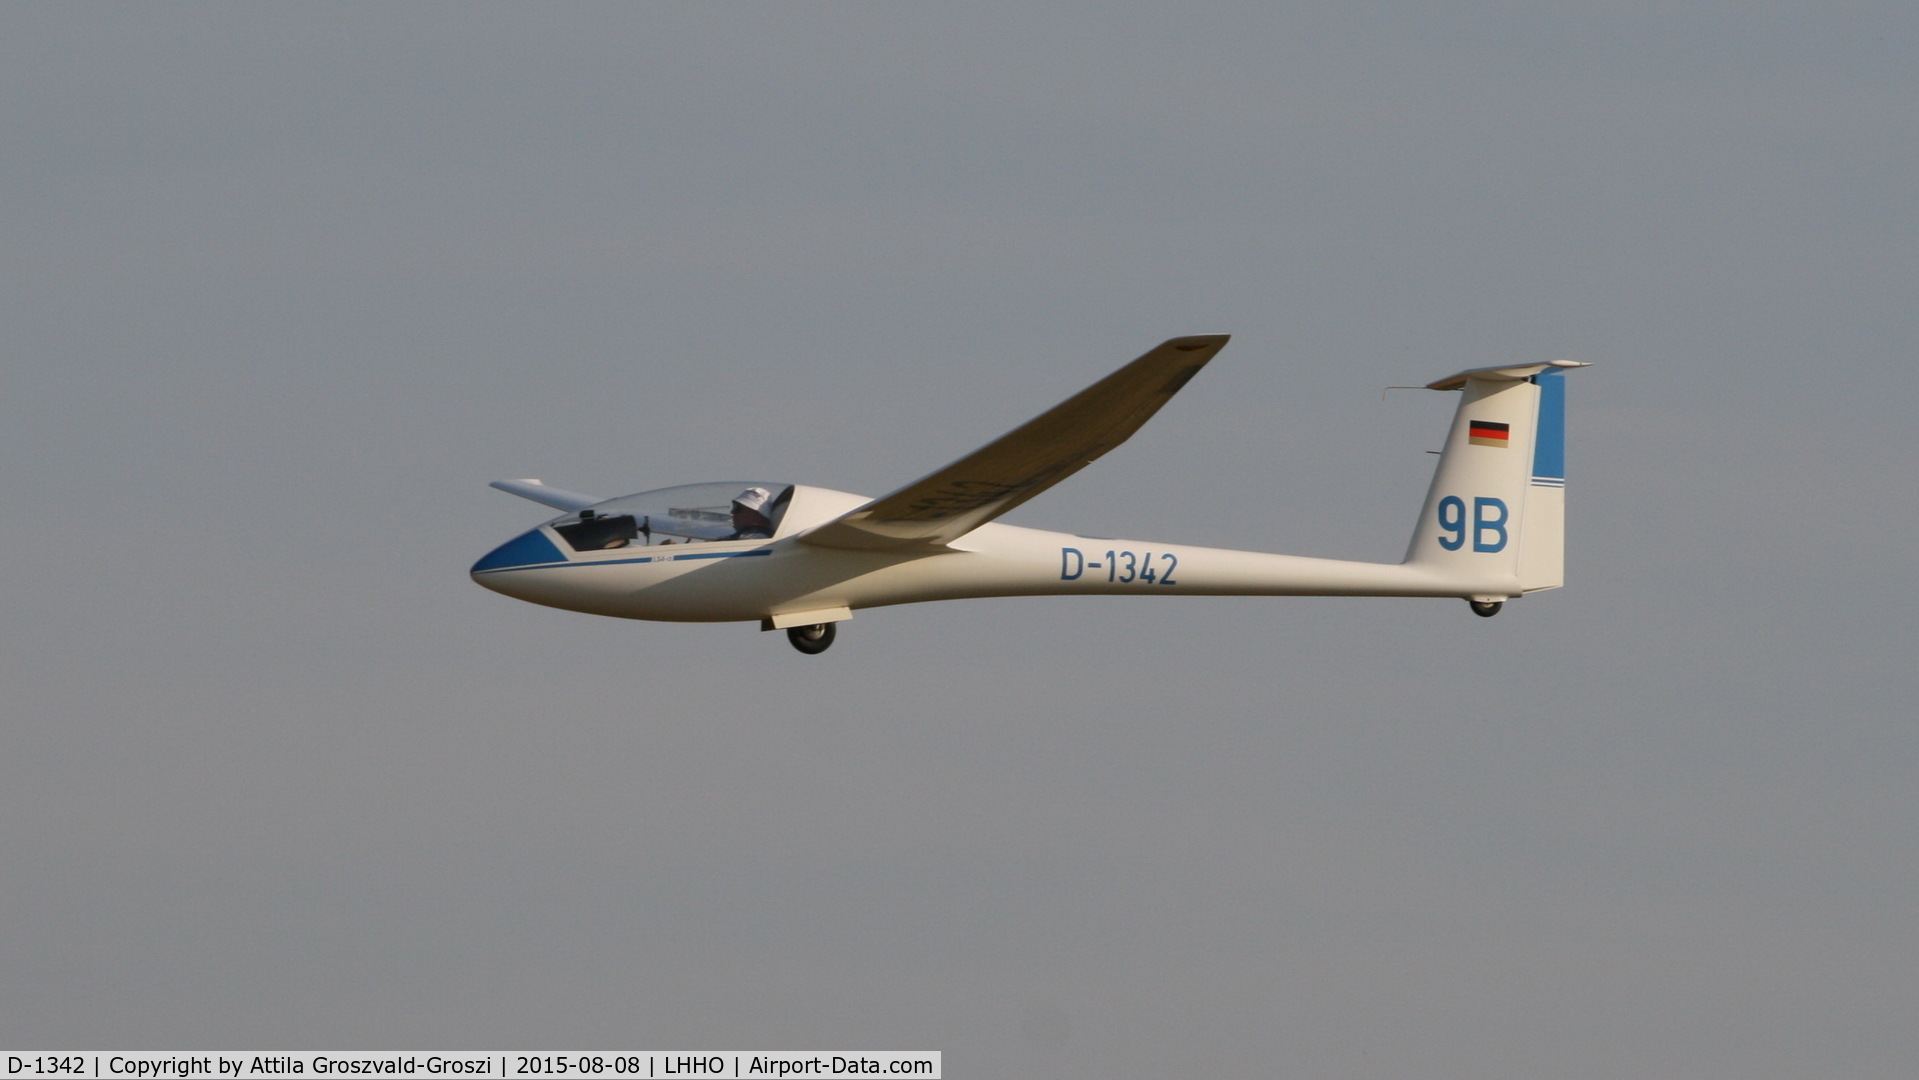 D-1342, 1987 Rolladen-Schneider LS-4A C/N 4662, Hajdúszoboszló Airport, Hungary - 60. Hungary Gliding National Championship and third Civis Thermal Cup, 2015